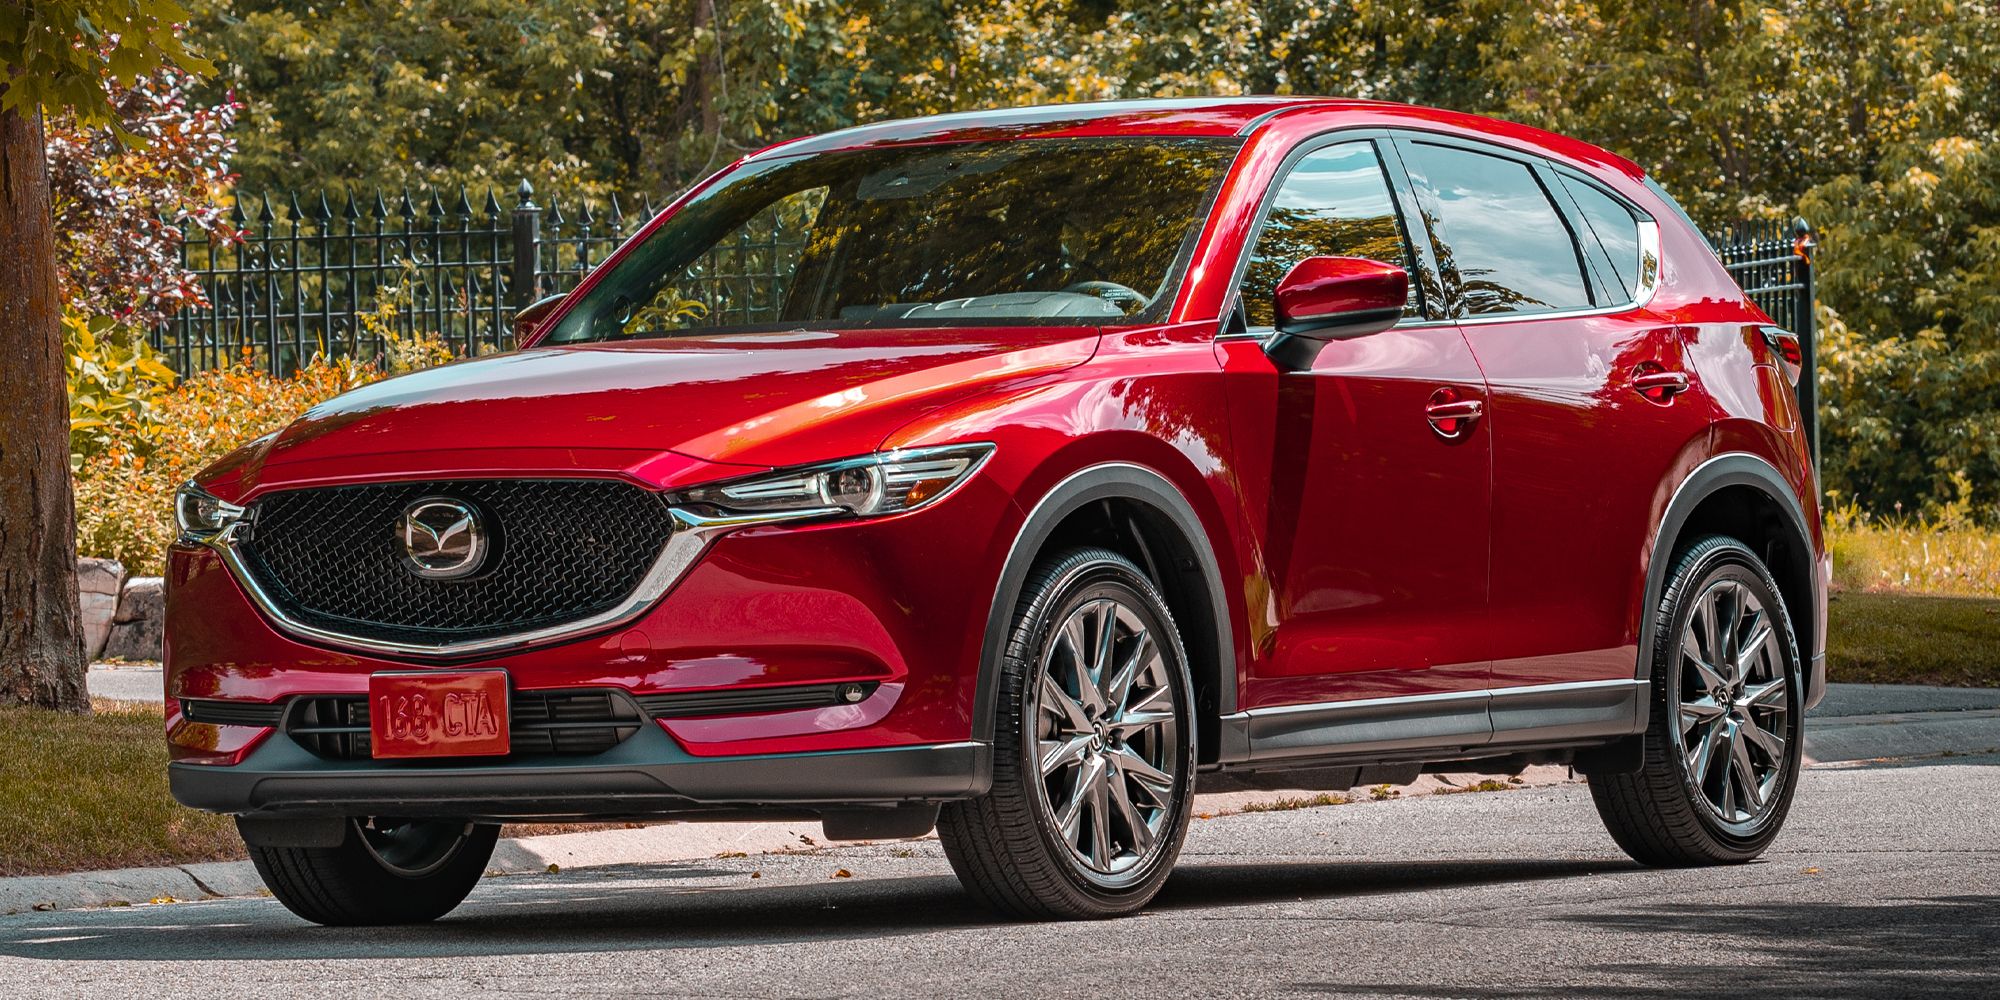 Front 3/4 view of the latest CX-5